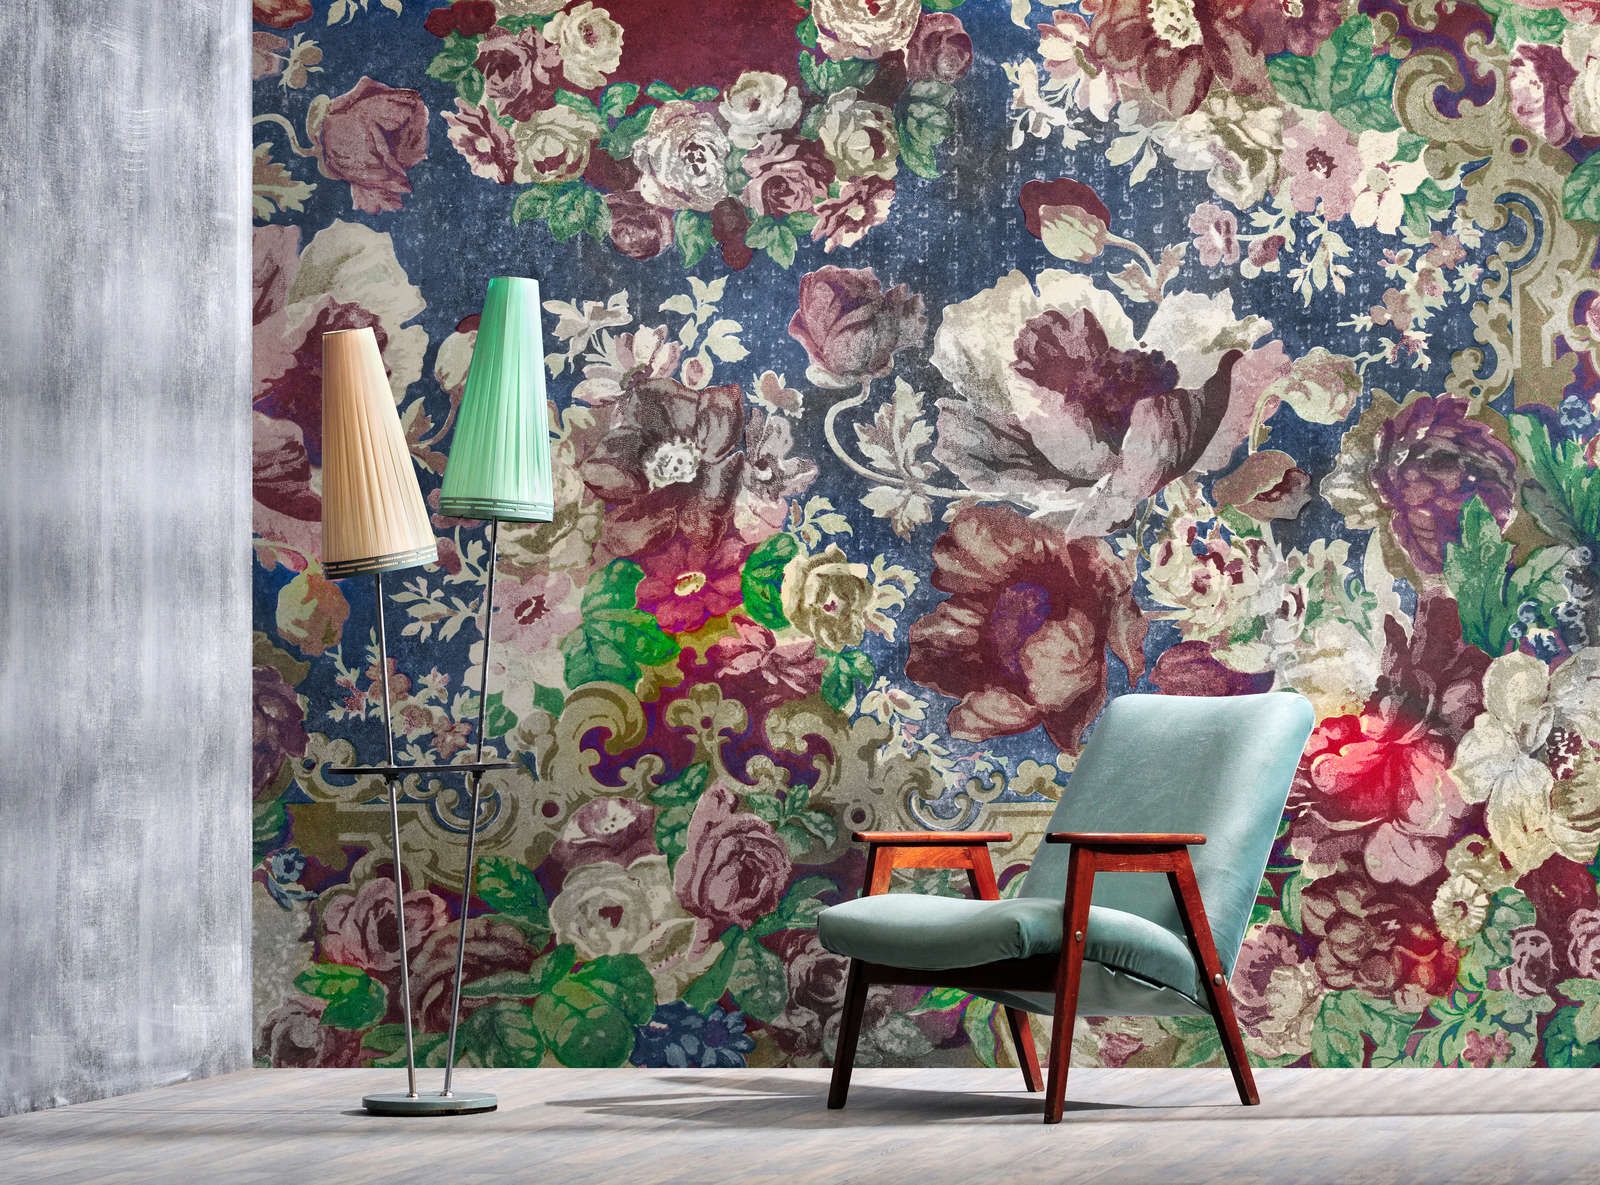             Photo wallpaper »carmente 2« - Classic style floral pattern in front of vintage plaster texture - Colourful | Matt, smooth non-woven
        